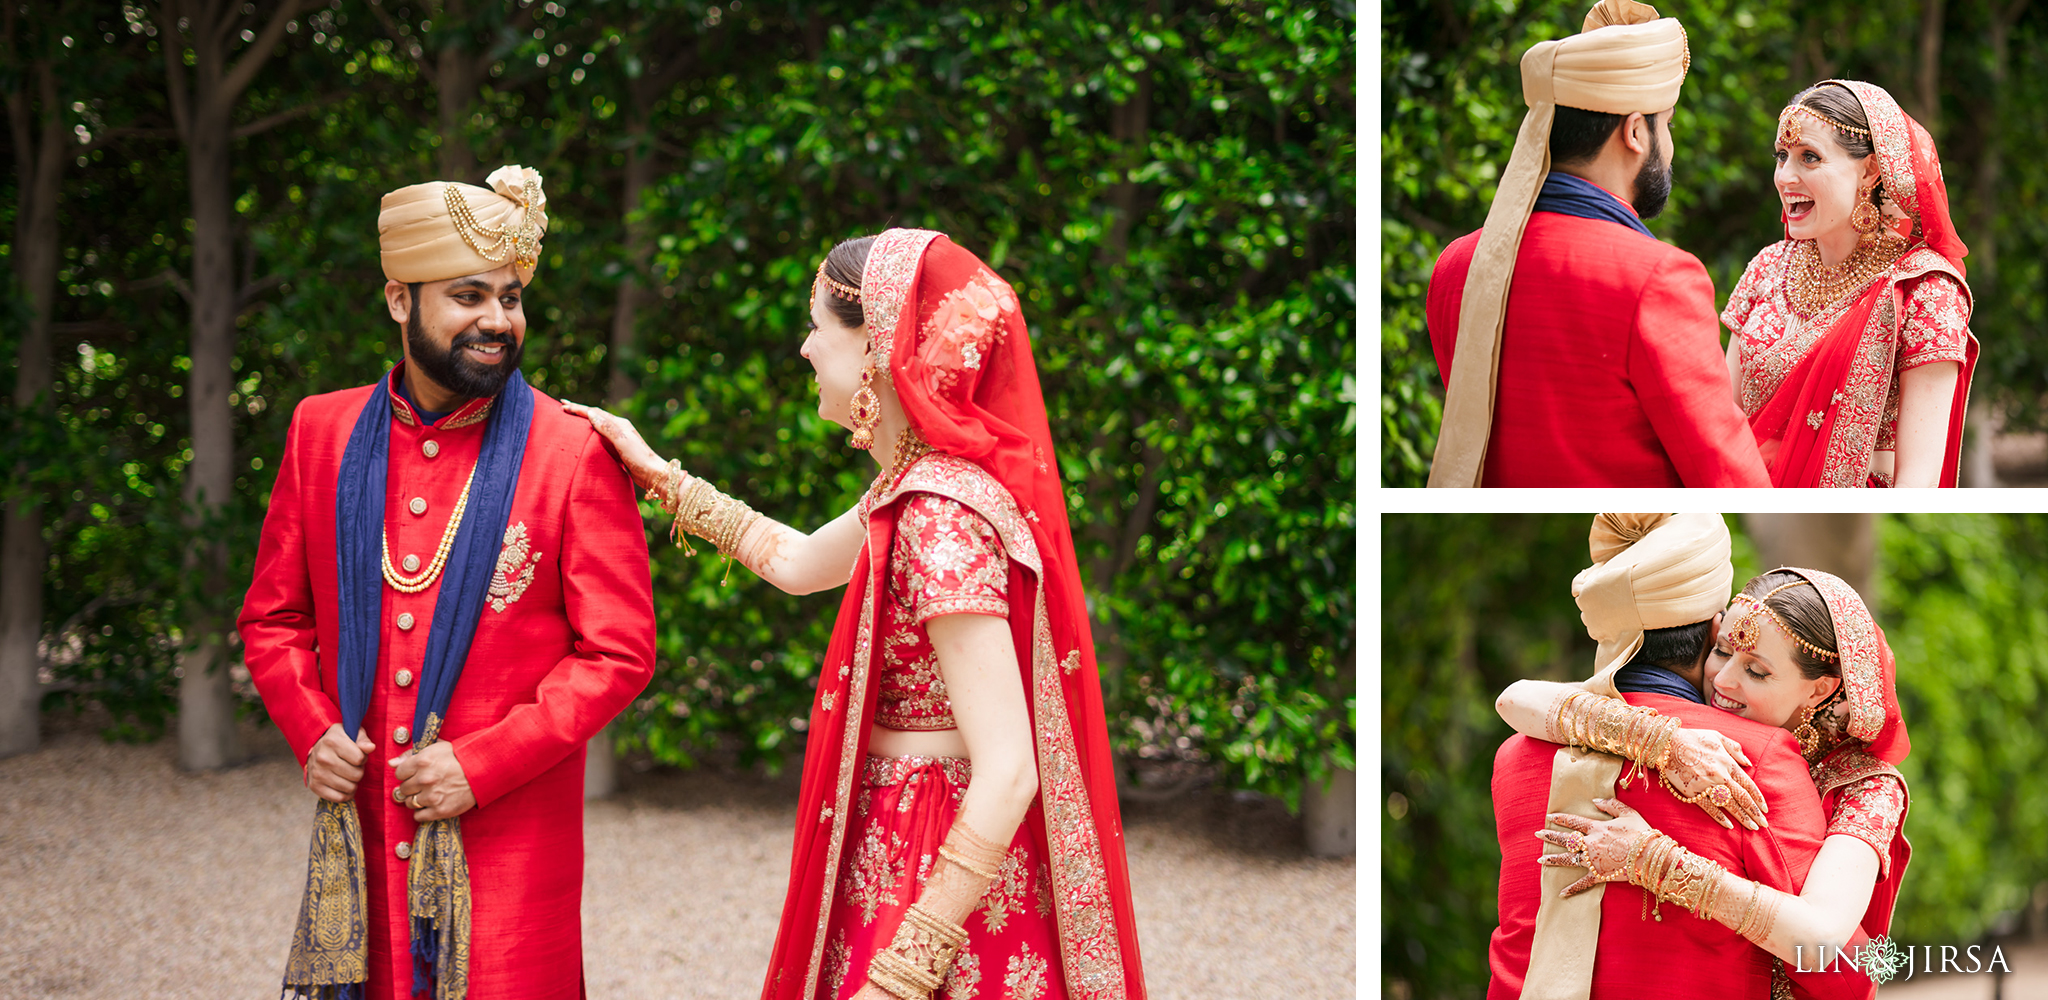 11 Hotel Irvine Multicultural Indian Wedding Photography